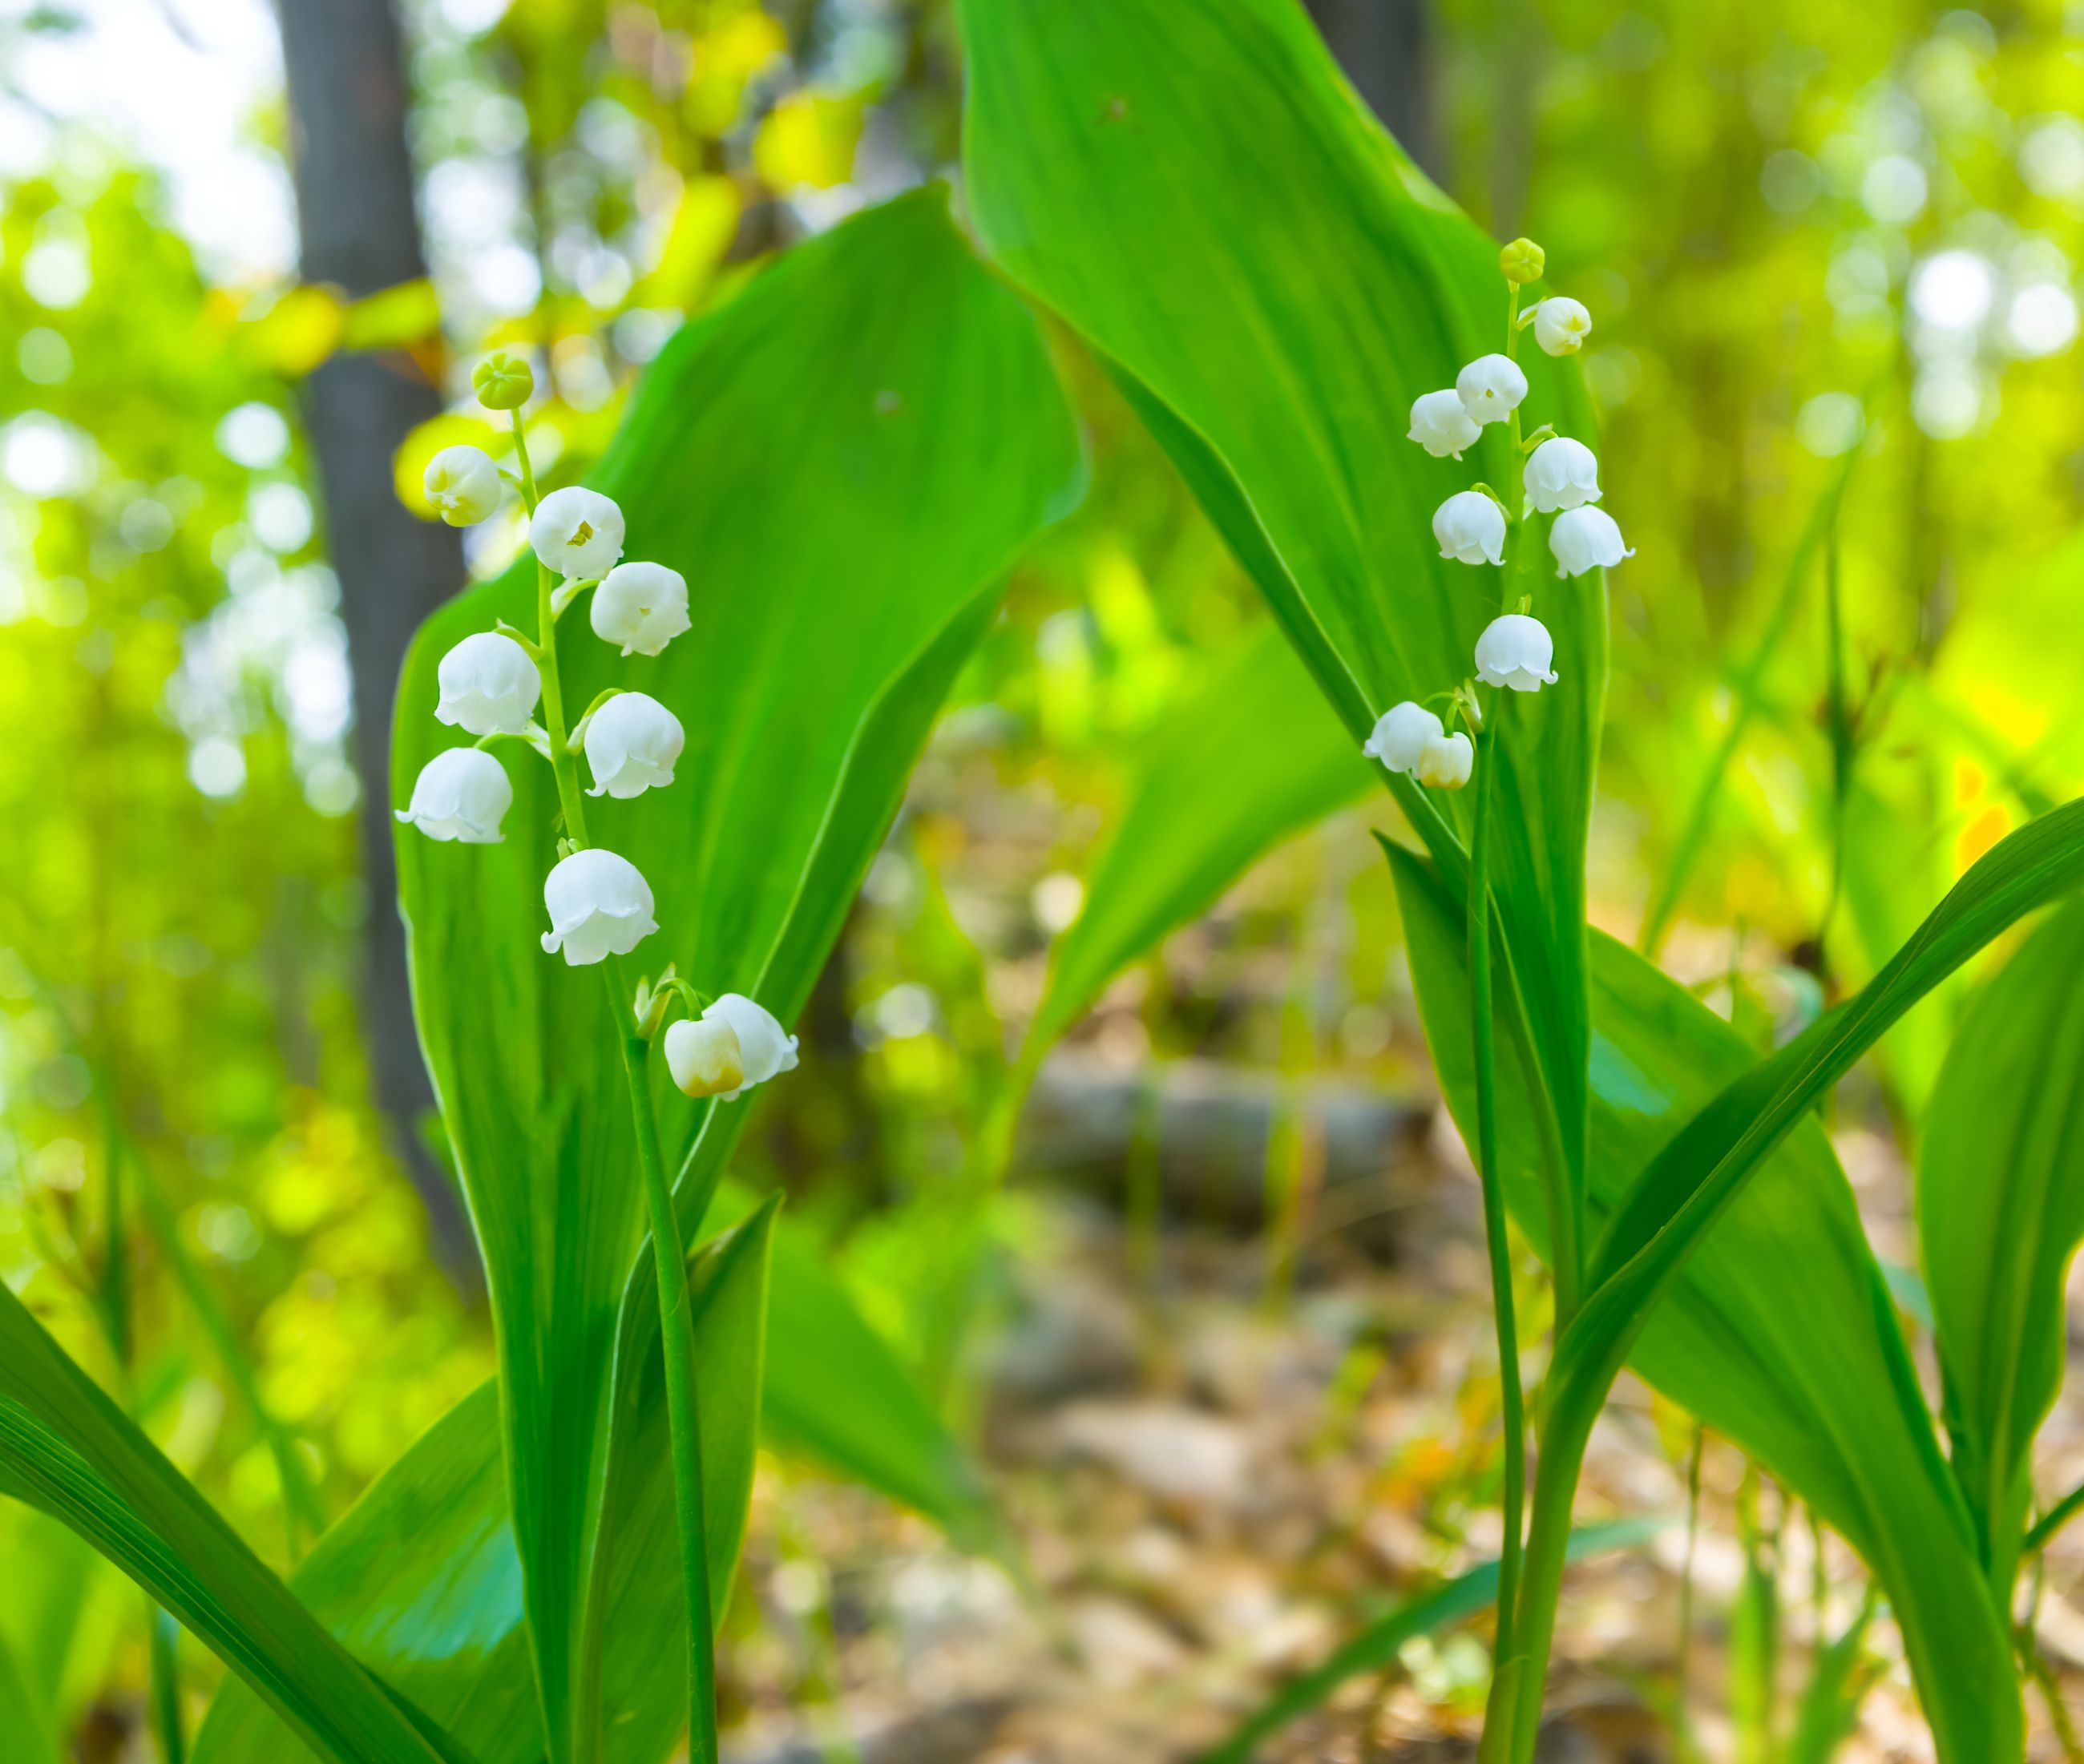 Lily of the valley: flowers, varieties & toxicity - Plantura